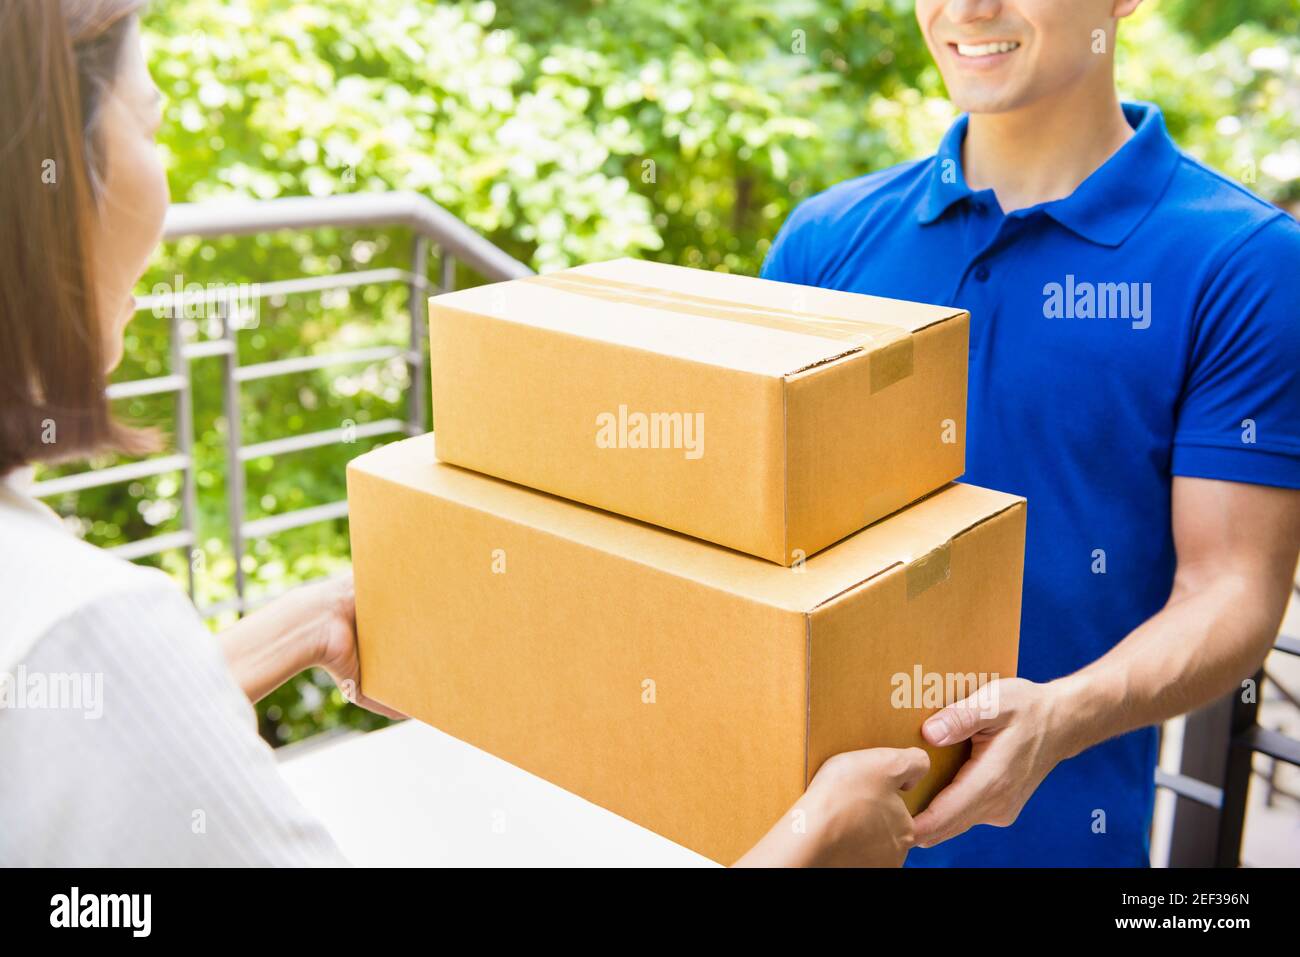 Delivery man in blue uniform handing parcel boxes to a woman - courier service concept Stock Photo